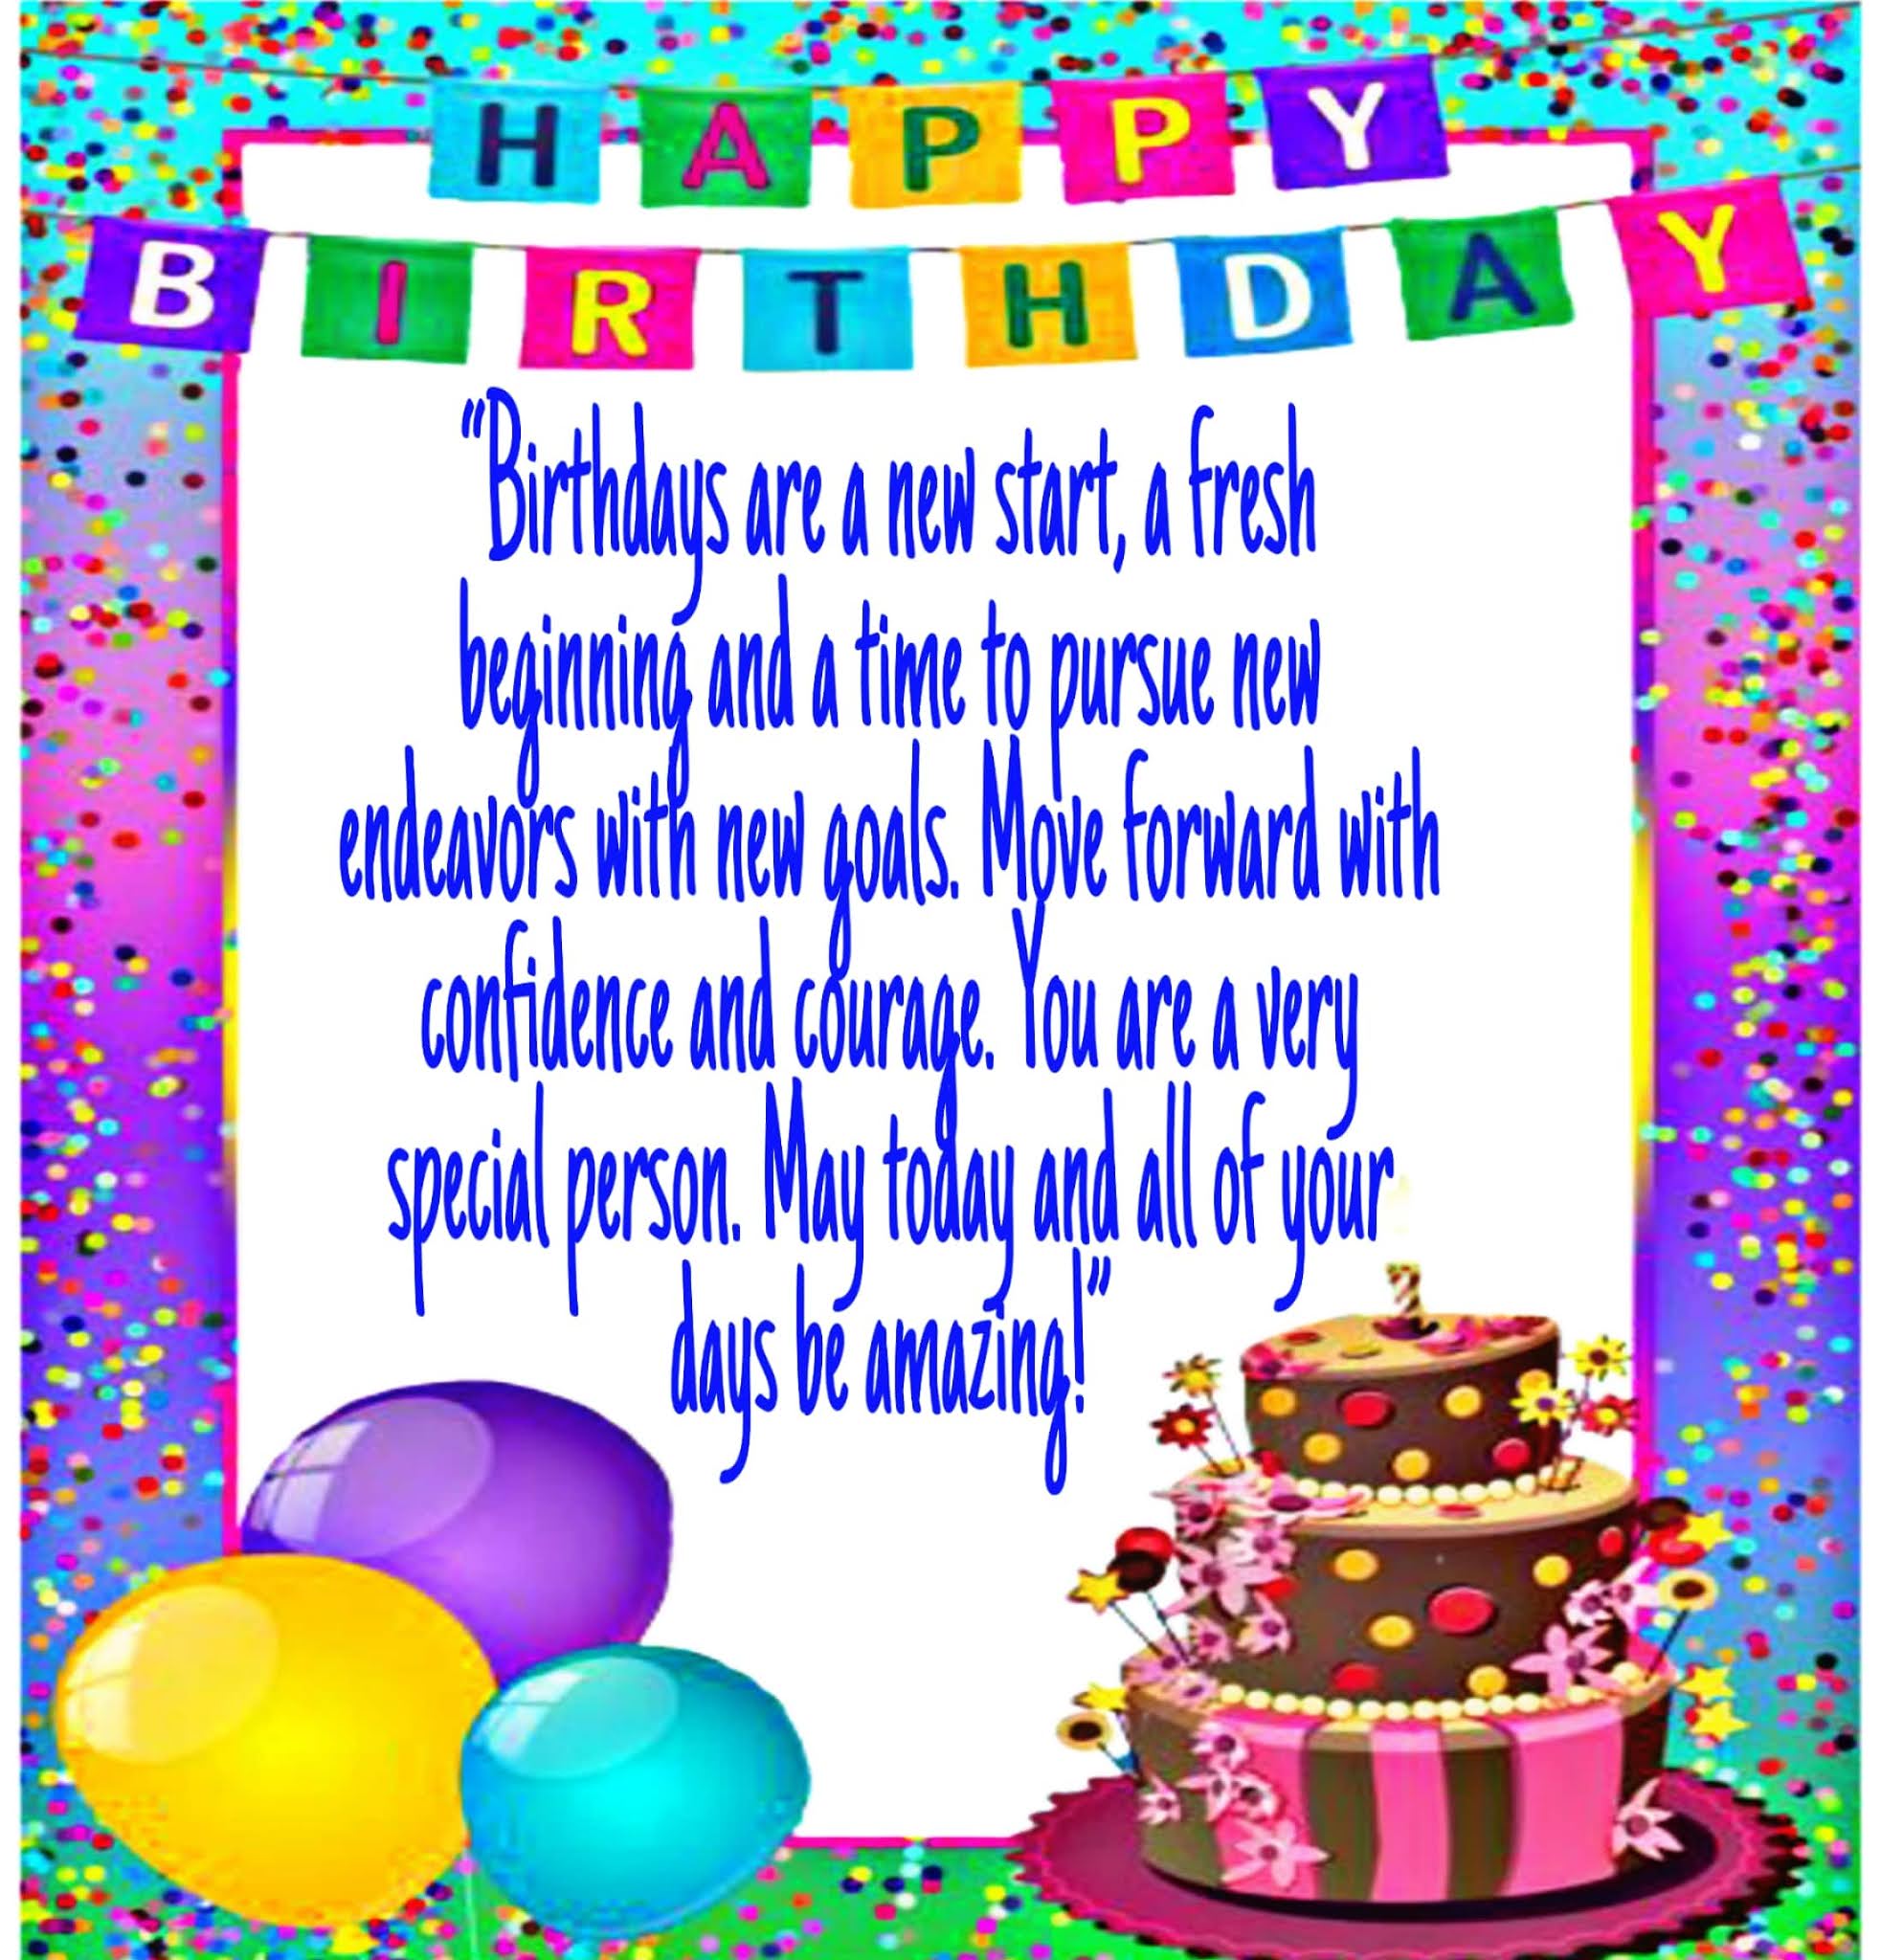 Happy birthday quotes with images||Birthday wishes quotes images